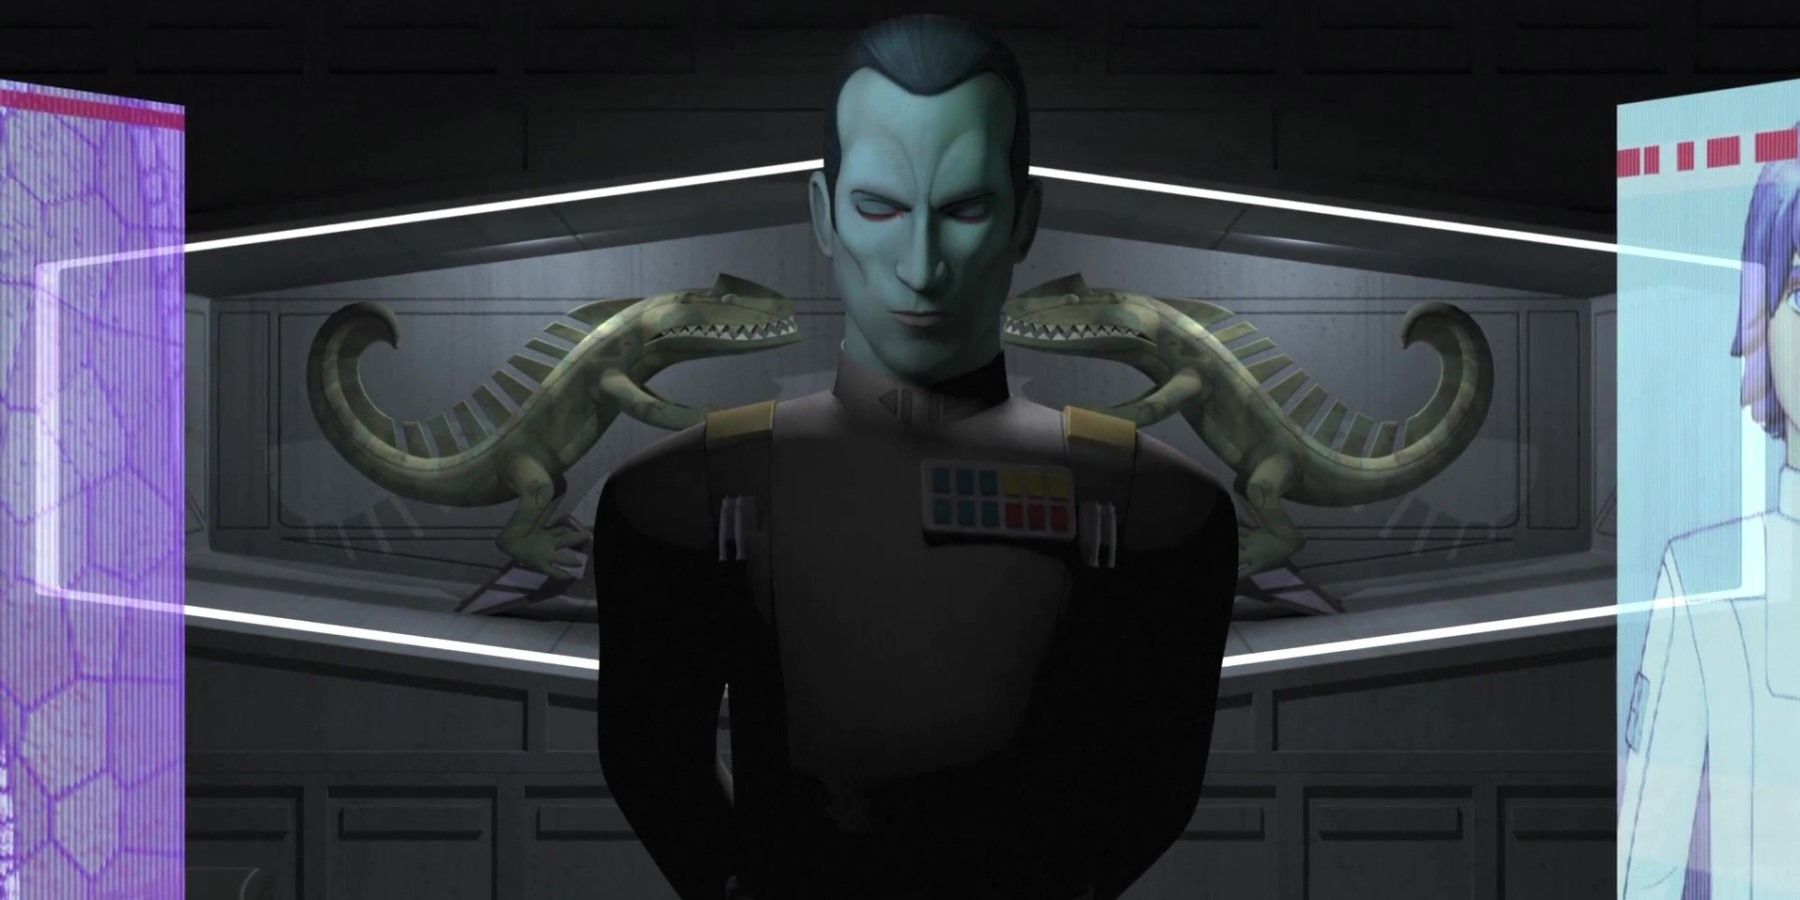 Admiral Thrawn from Star Wars Rebels